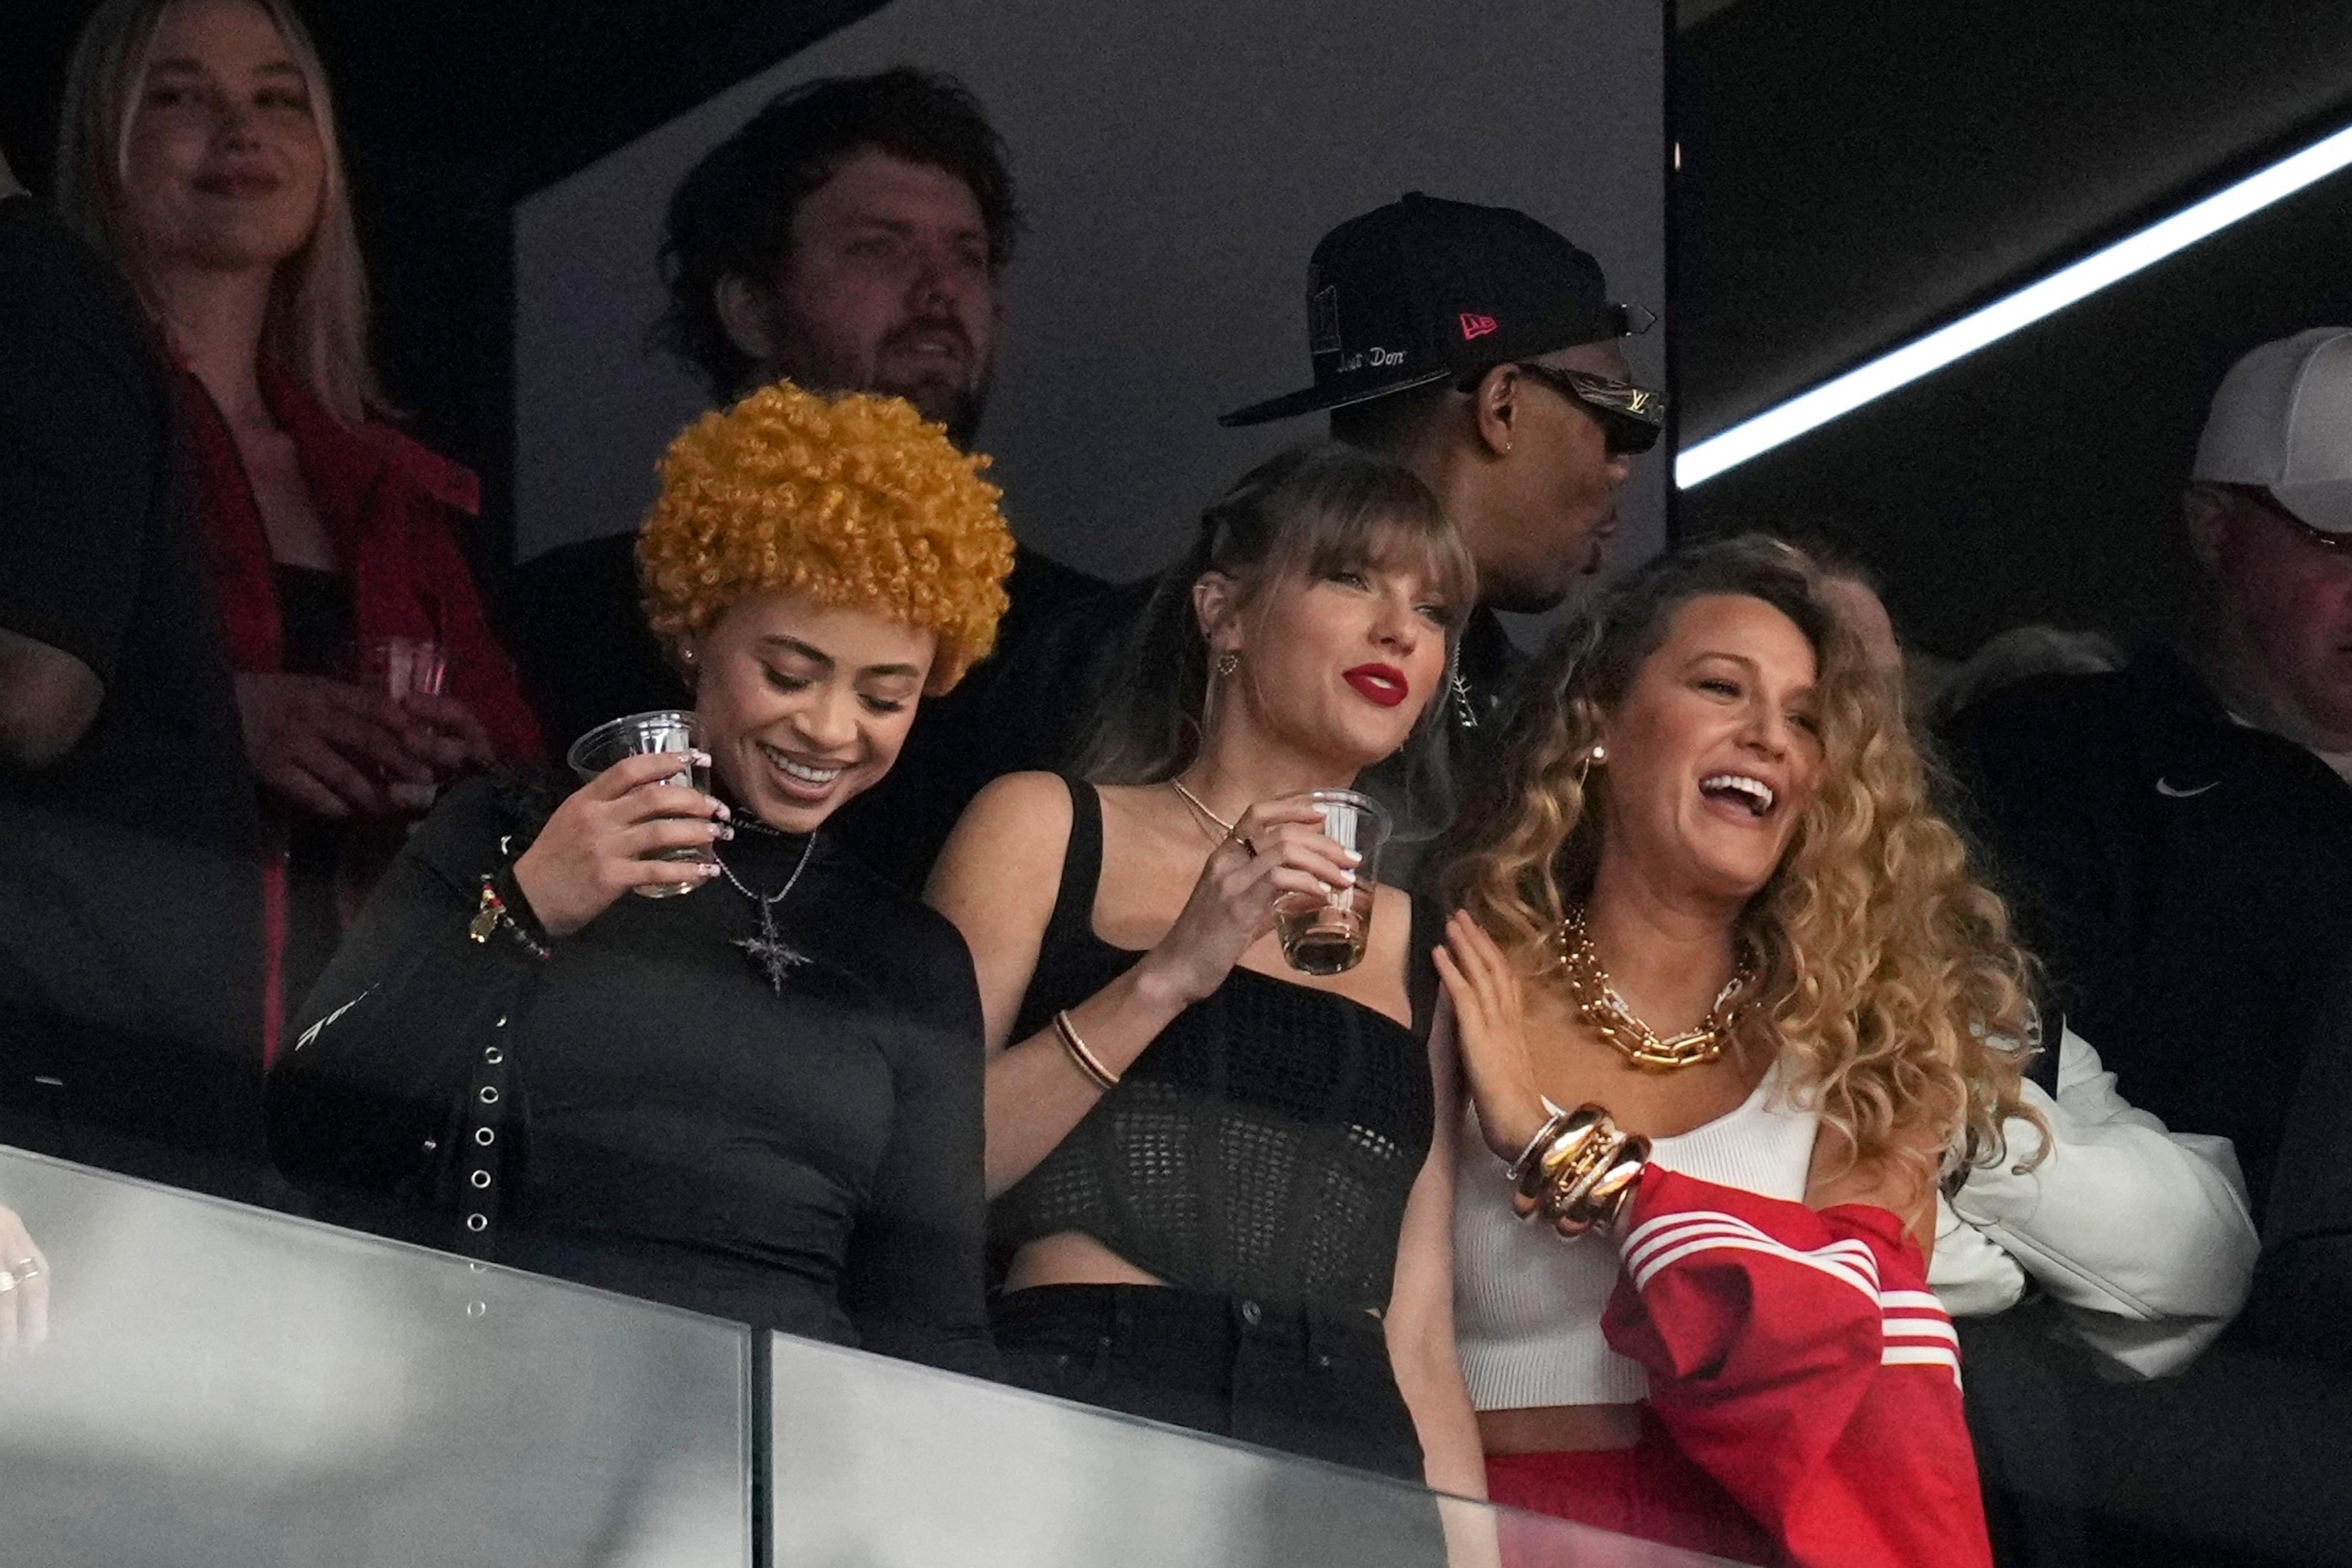 The 'Karma' singer brought along her close friends for the big game in Las Vegas to cheer on her boyfriend, Travis Kelce. Several clips of the Grammy-winning pop sensation went viral on social media in which she could be seen cheering for Kelce.